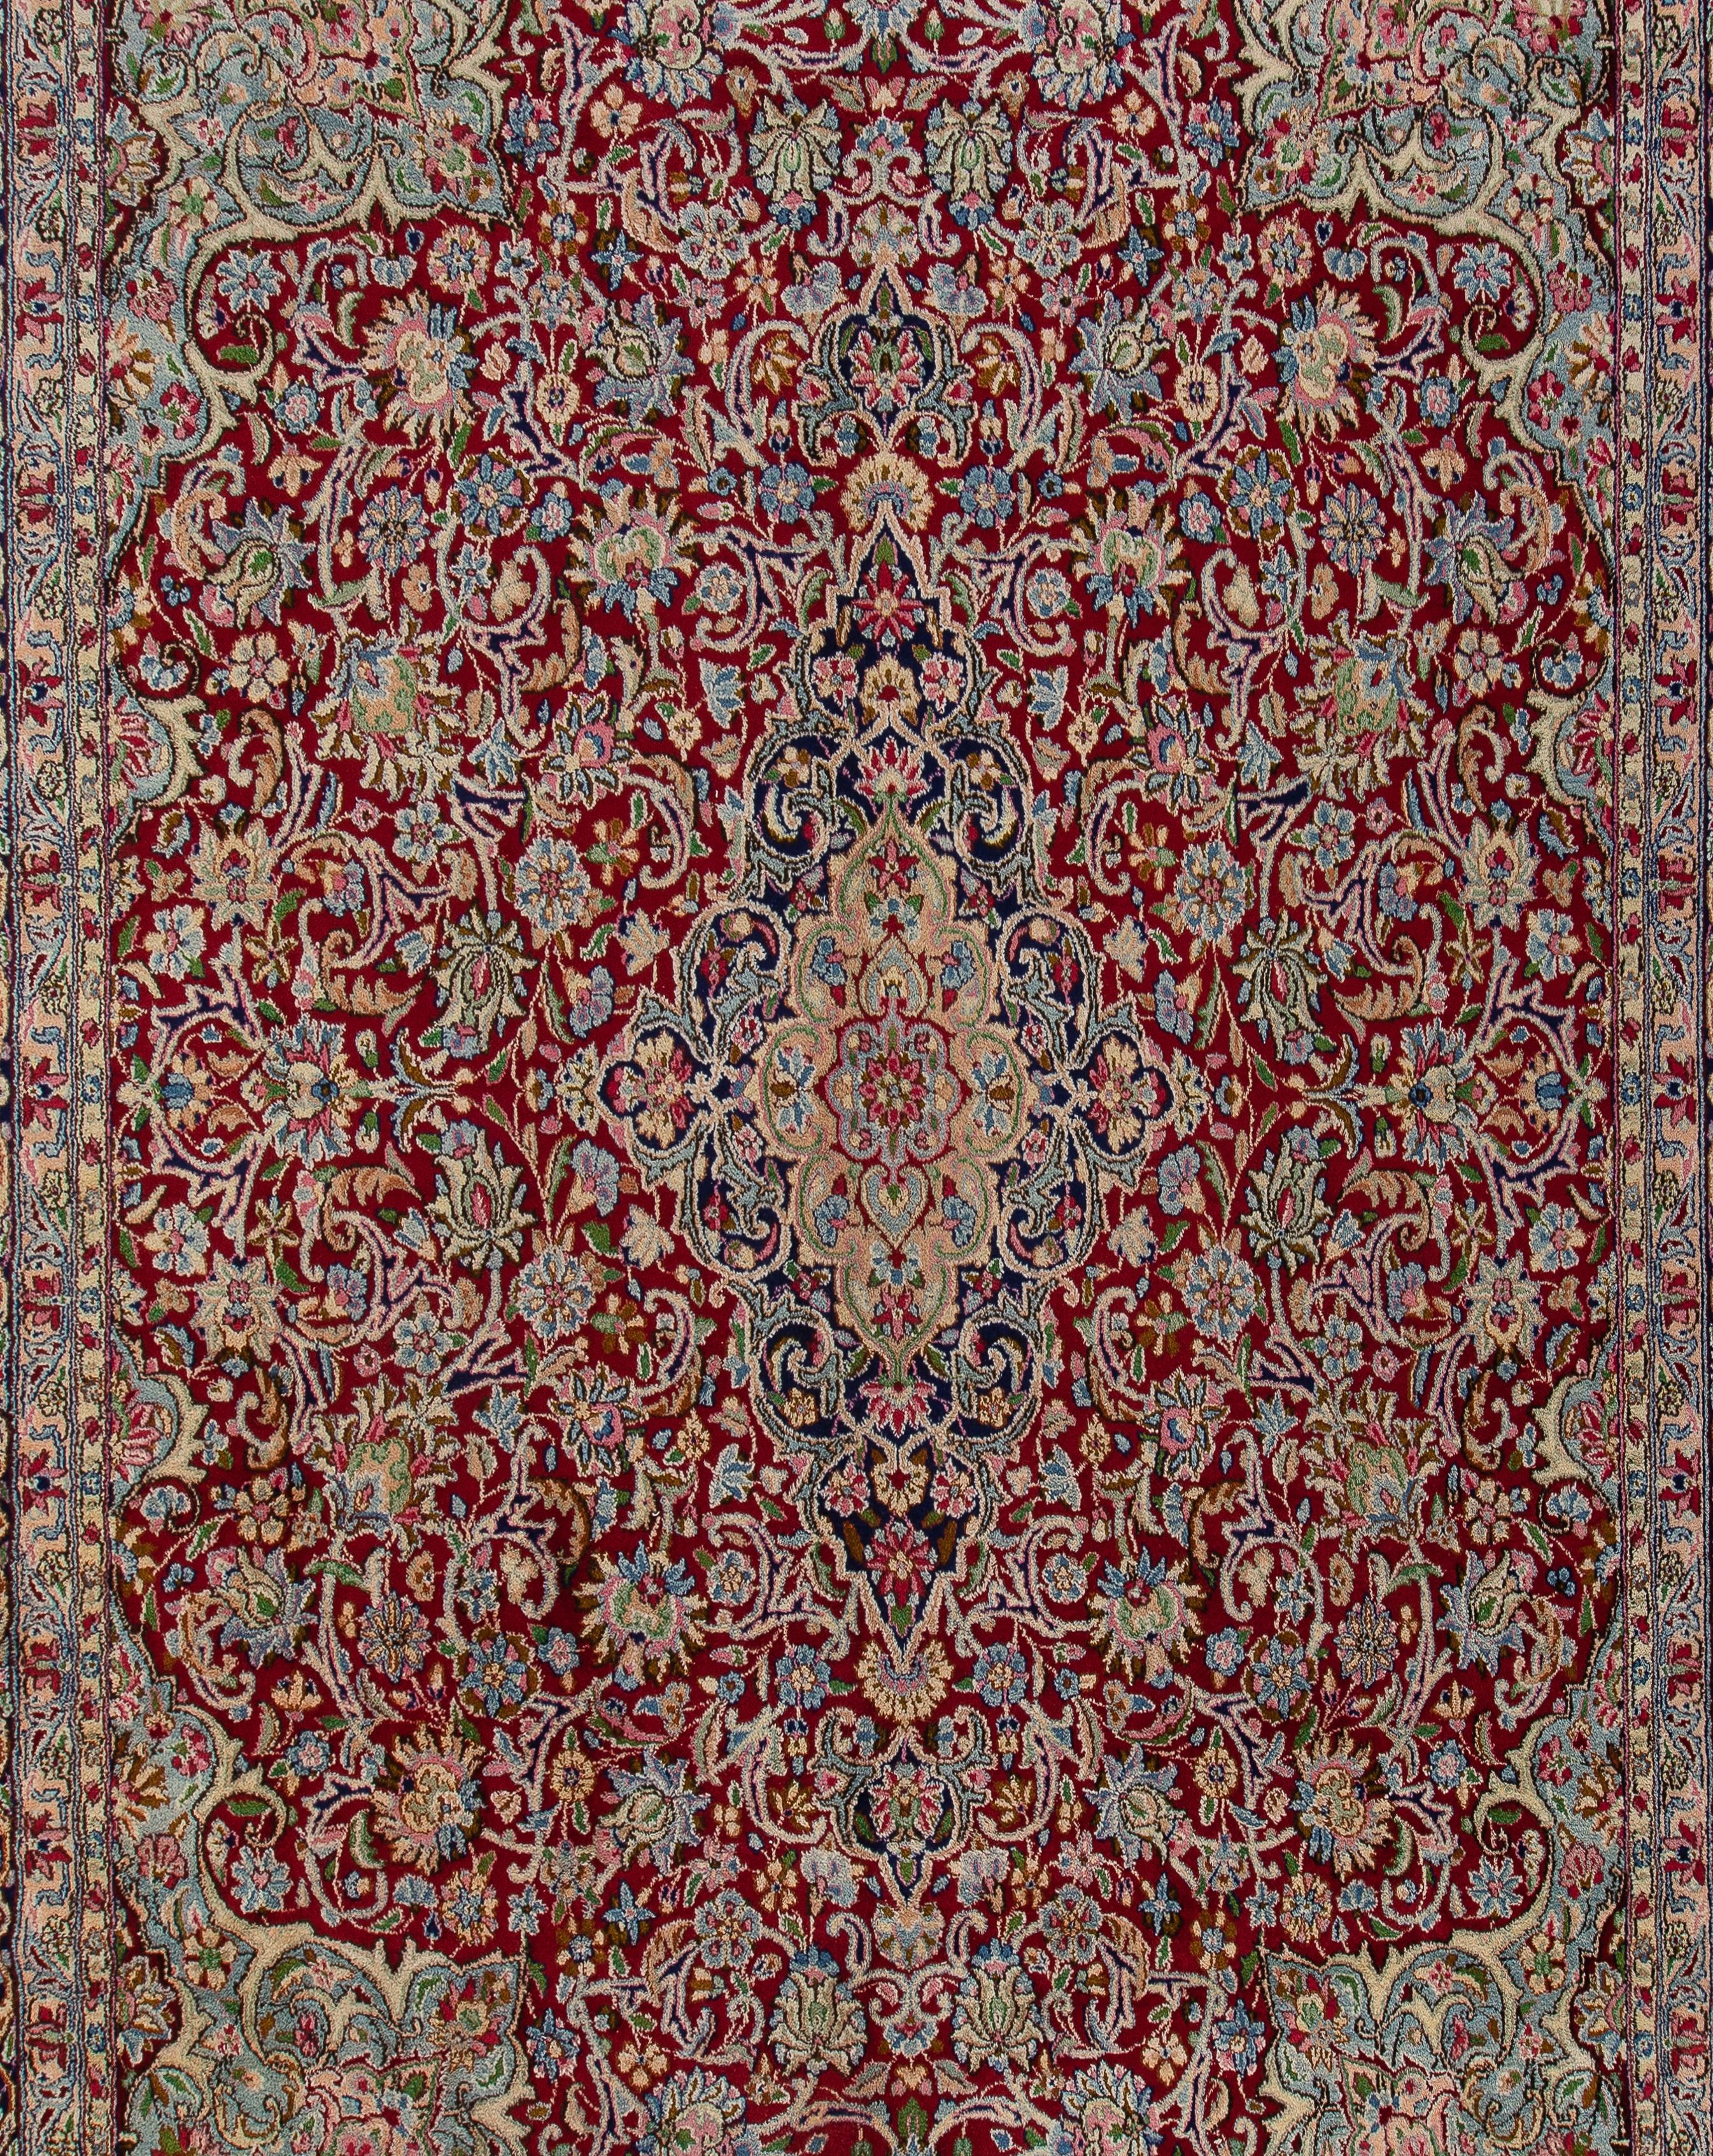 Wool 9.2x12.2 Ft Antique Persian Kashan Rug, Fine Traditional Oriental Carpet For Sale